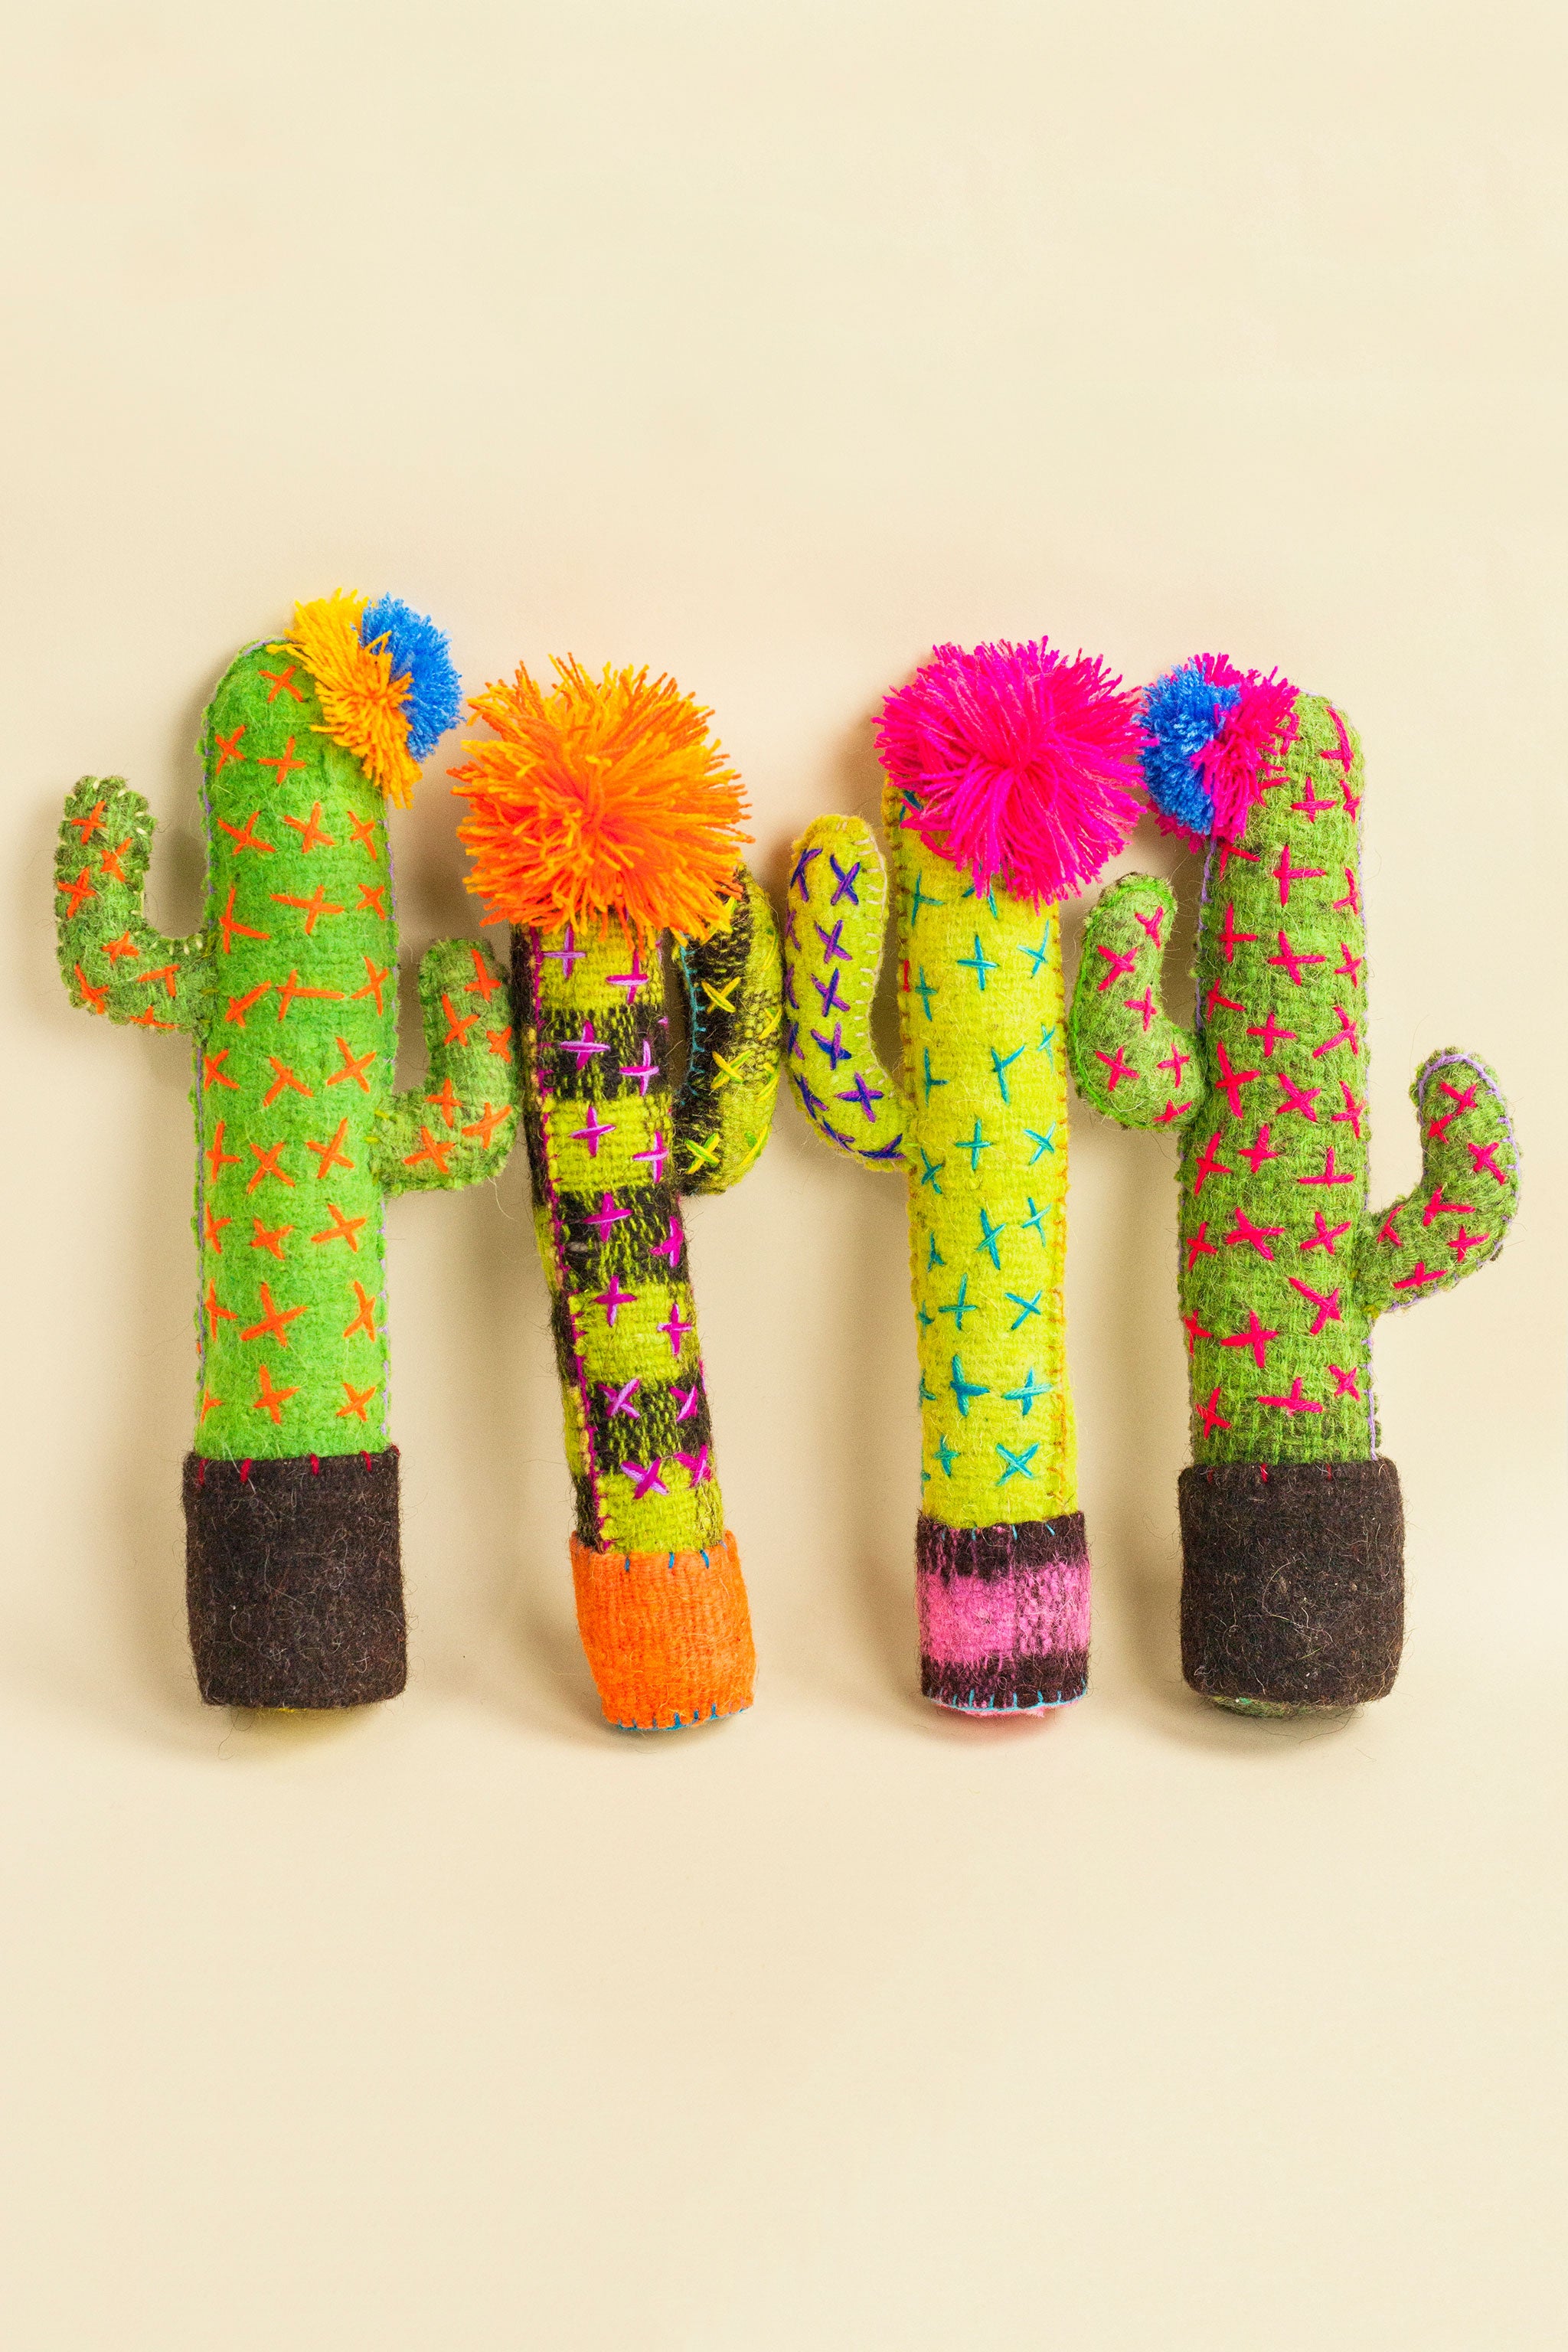 Standing felt cactus plush toys in different shades of green with hand-embroidered thorns and a colorful pom pom flower on top.